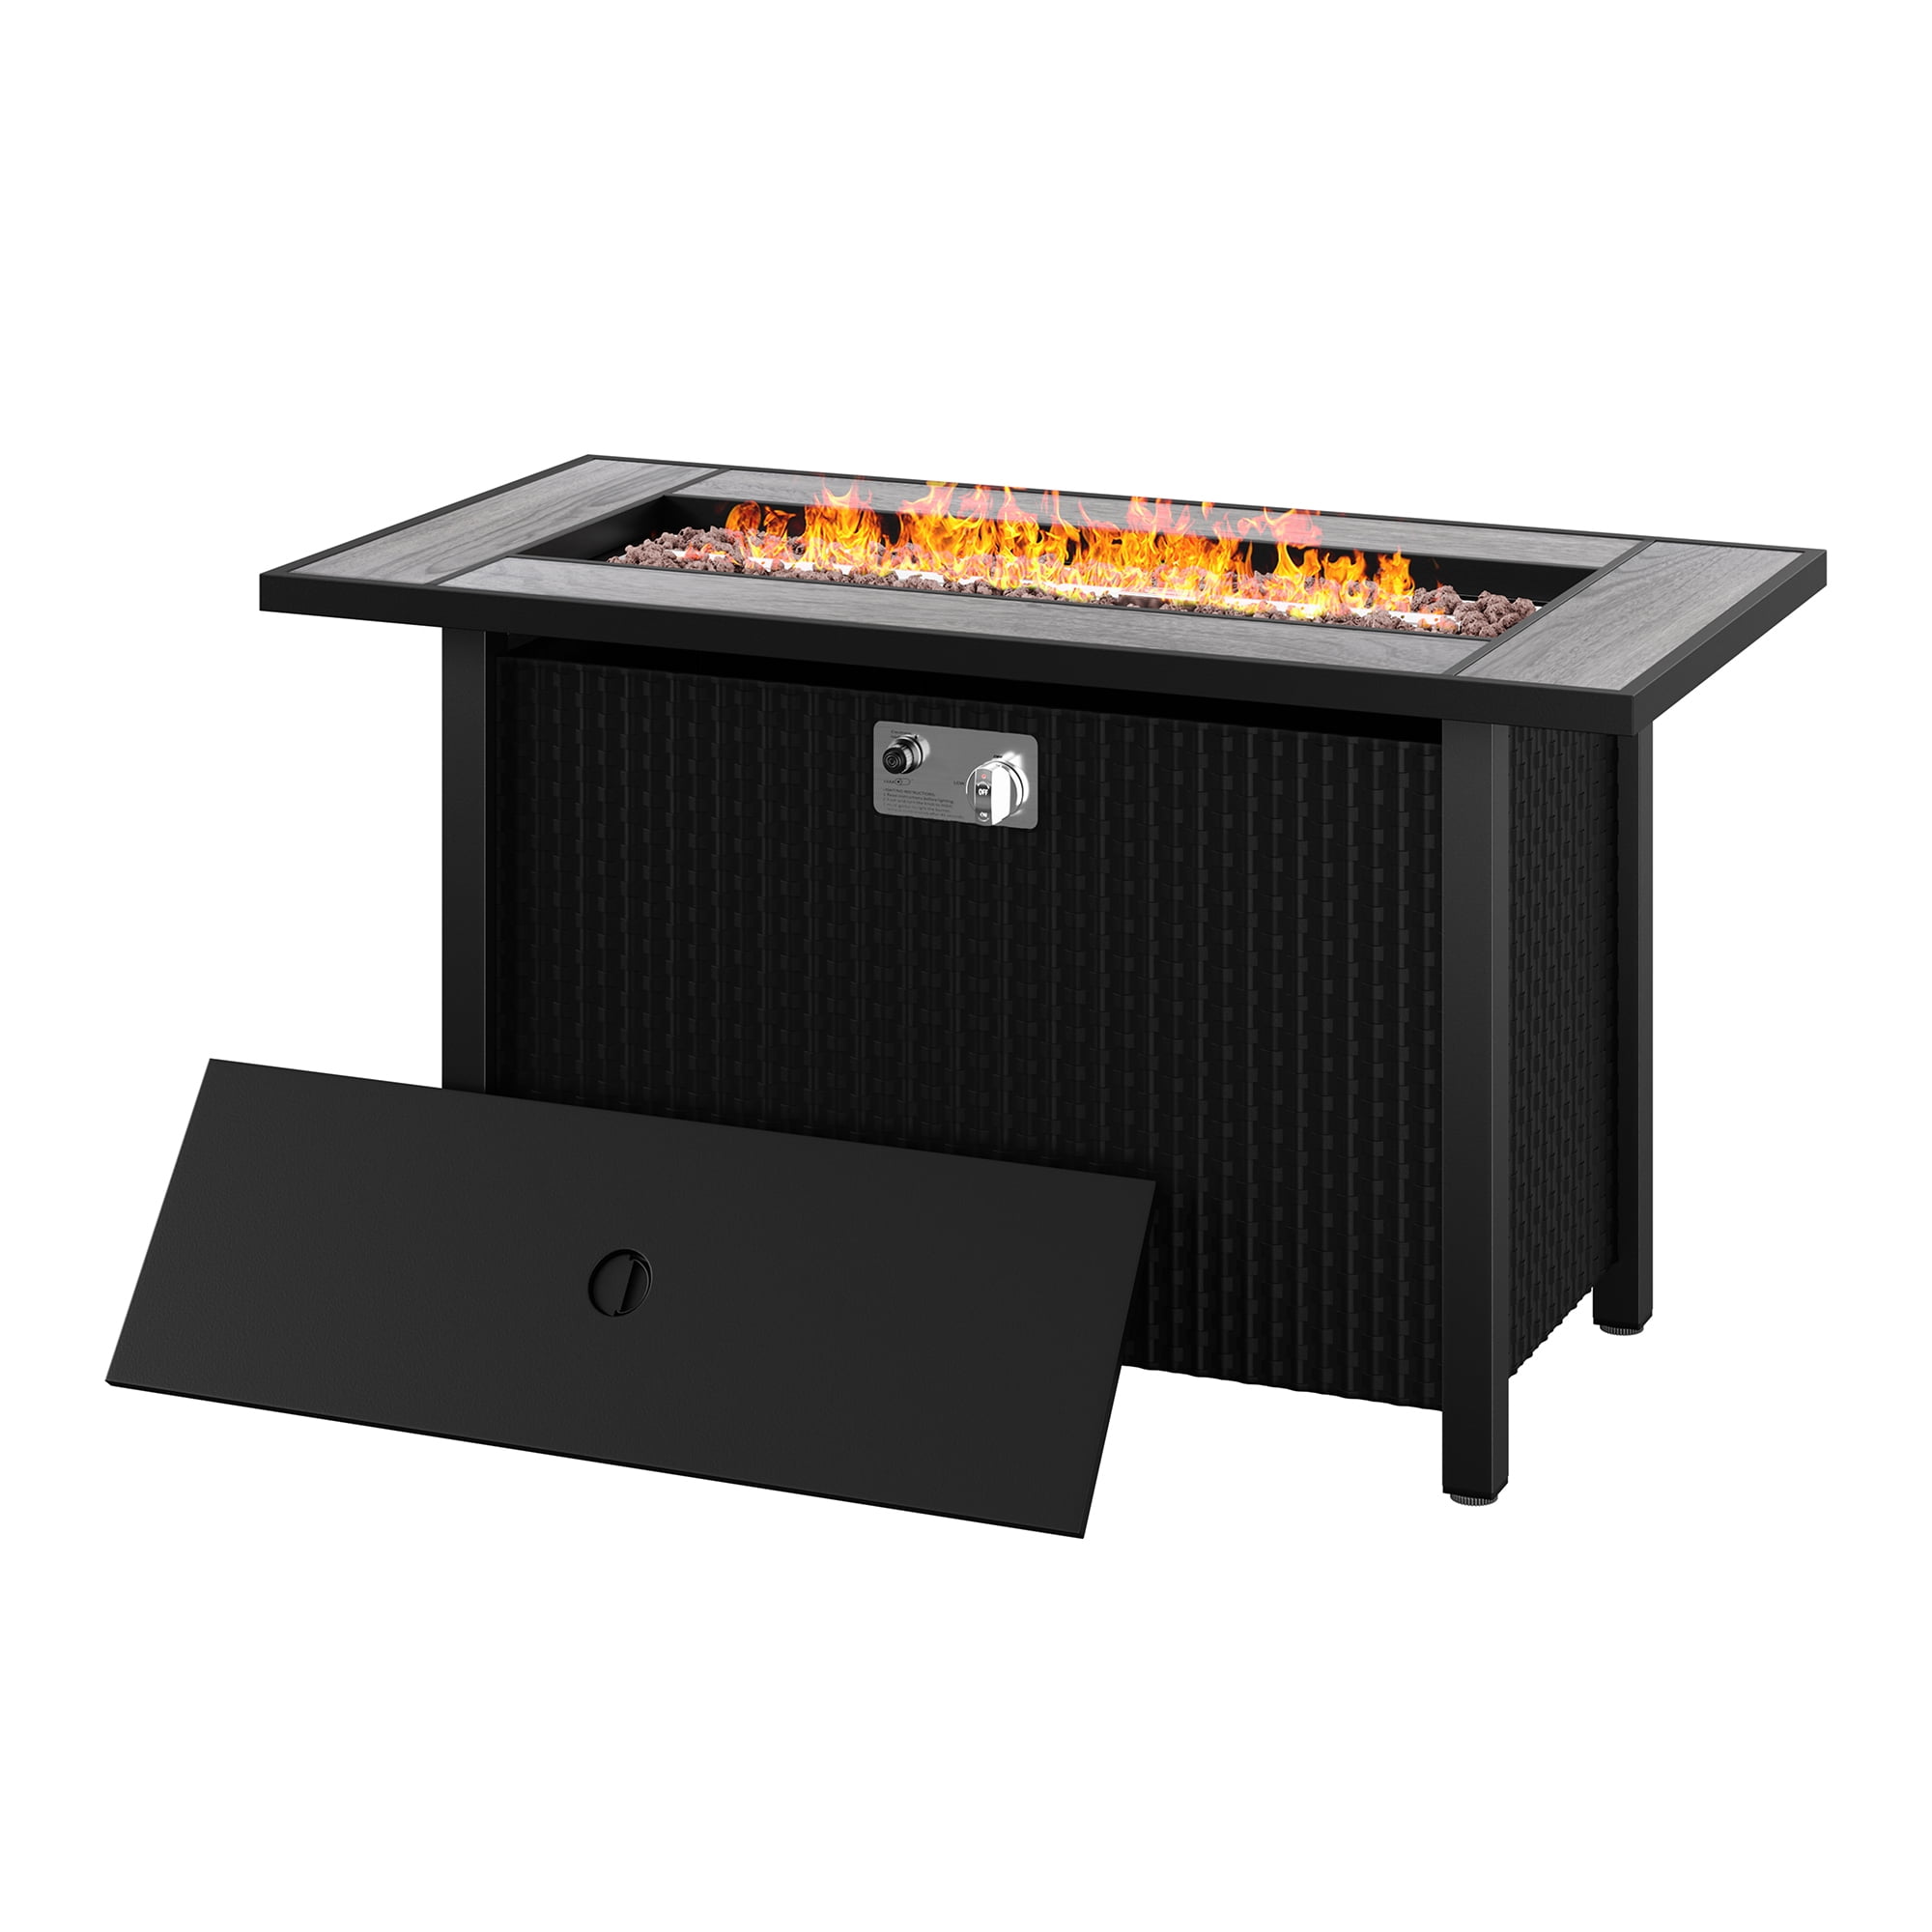 Walsunny 44.9" Gas Fire Pit Table 50000 BTU Propane with Removable Lid & Waterproof Cover with Lava Rock and Alumium Frame Tables(Grey) - image 1 of 8